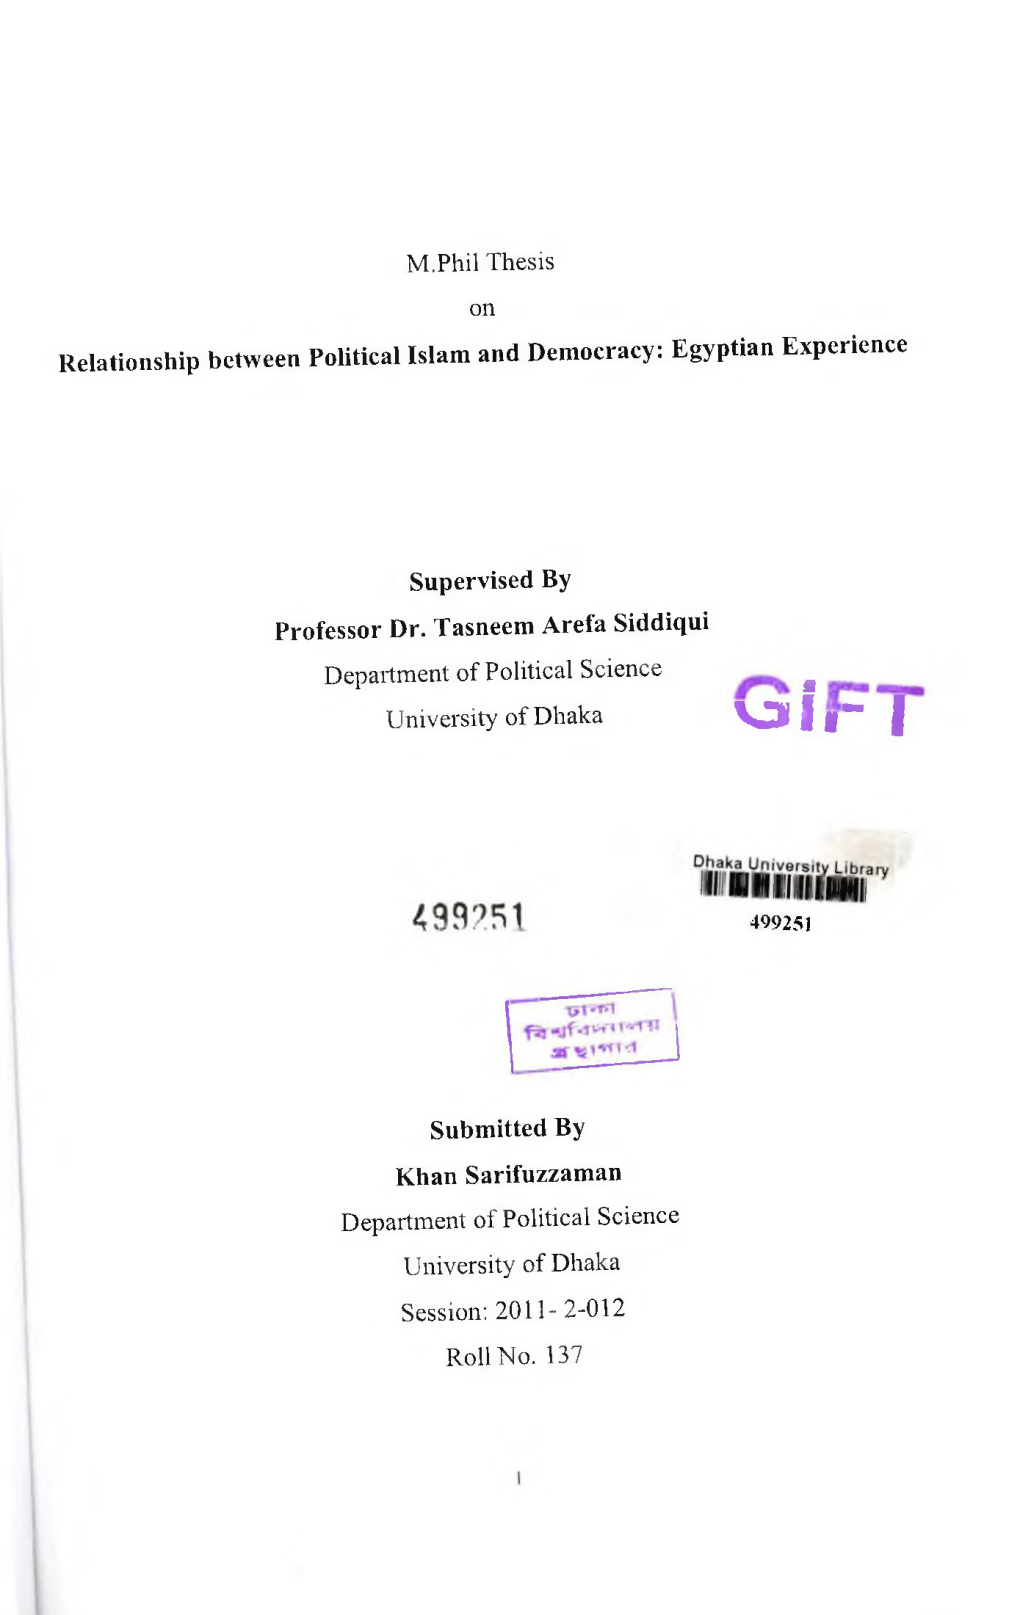 M.Phil Thesis on Relationship Between Political Islam and Democracy: Egyptian Experience